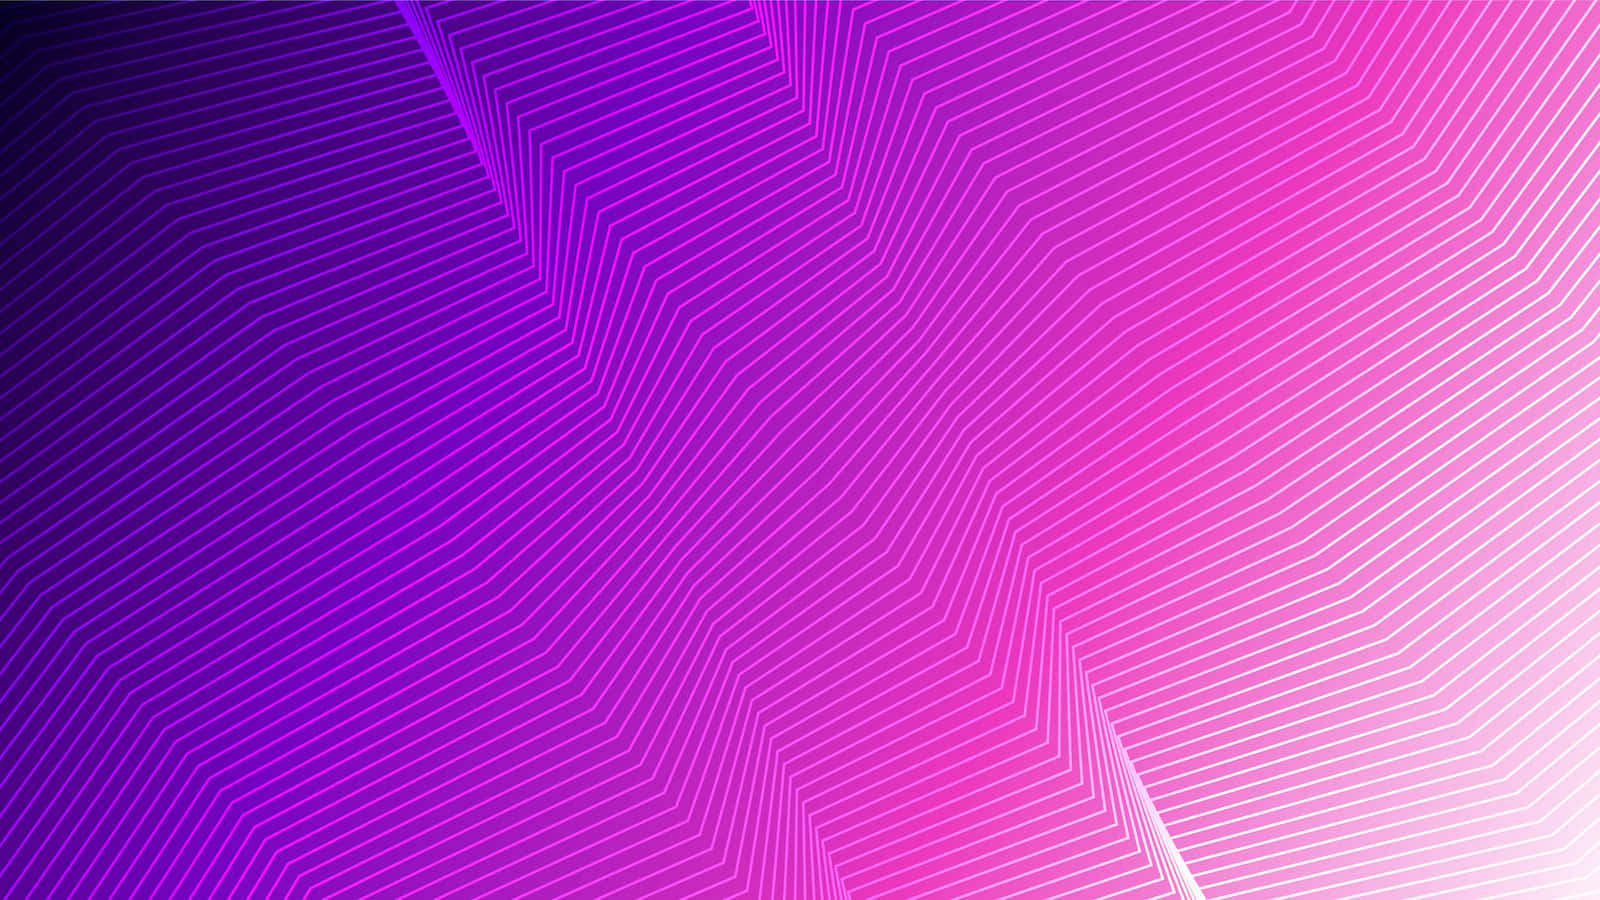 Shades of Vibrant Bliss: A Perfect Purple and Pink Background